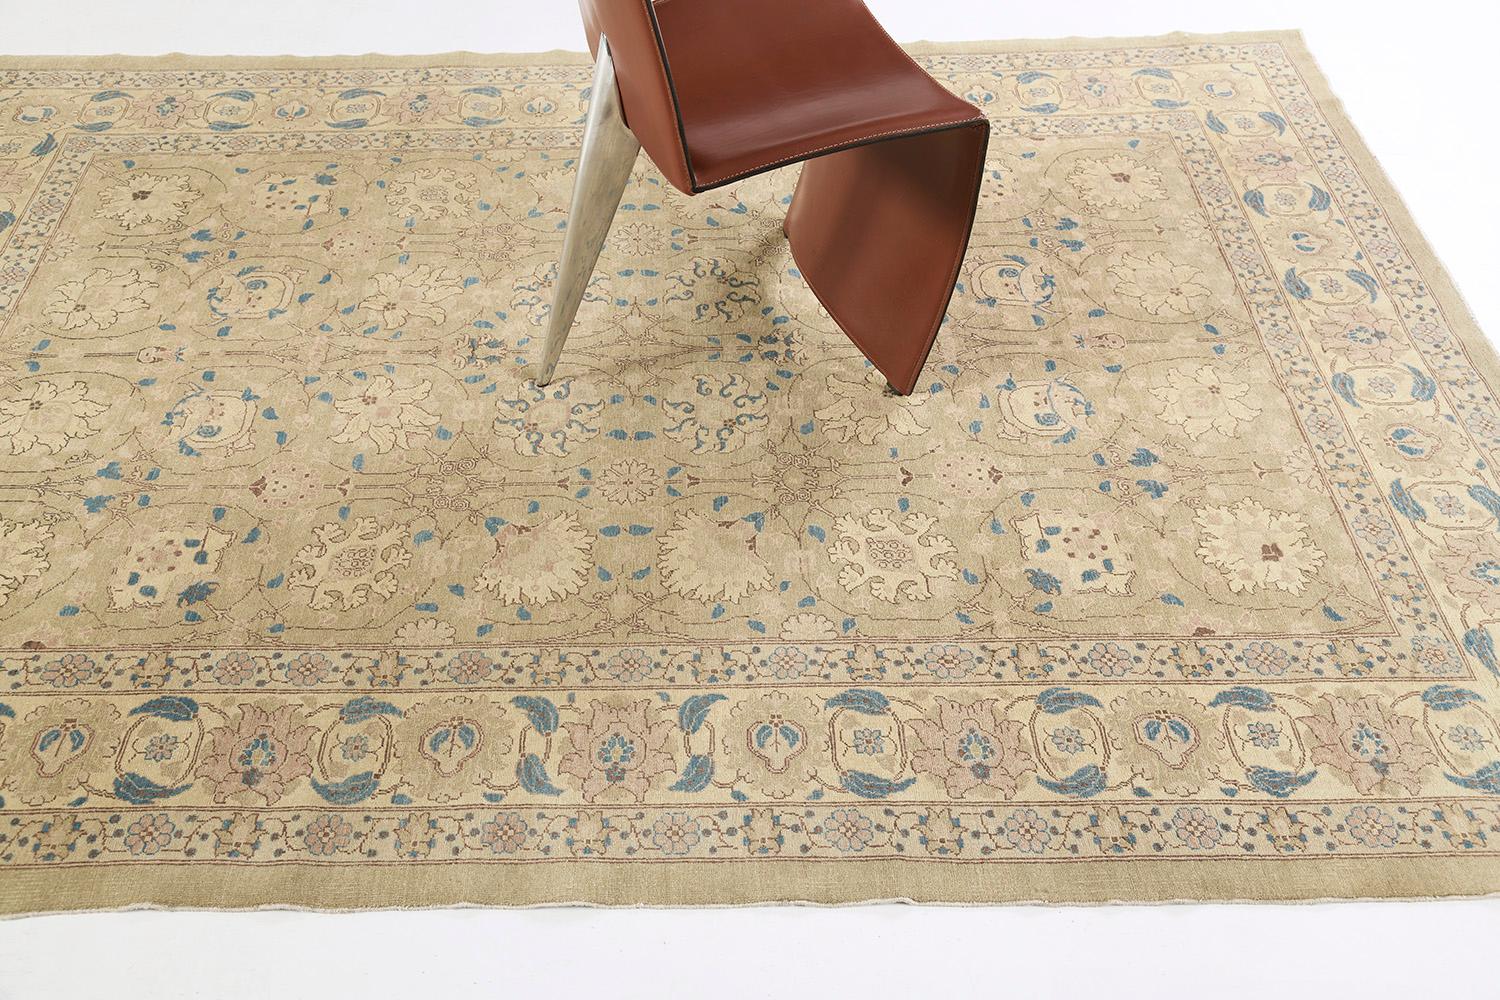 Natural Dye Classic Tabriz Design Rug, Fable Collection from Mehraban For Sale 3